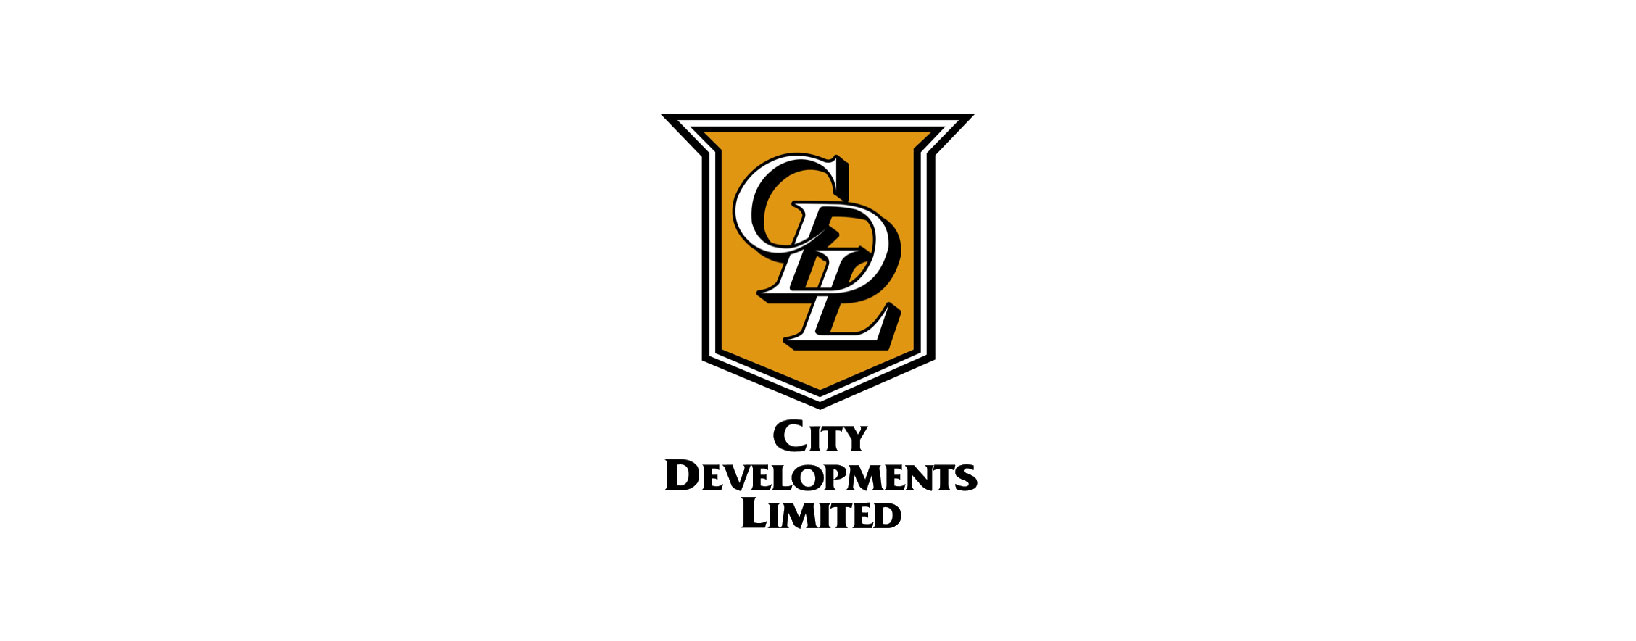 Real Estate  - City Developments Limited